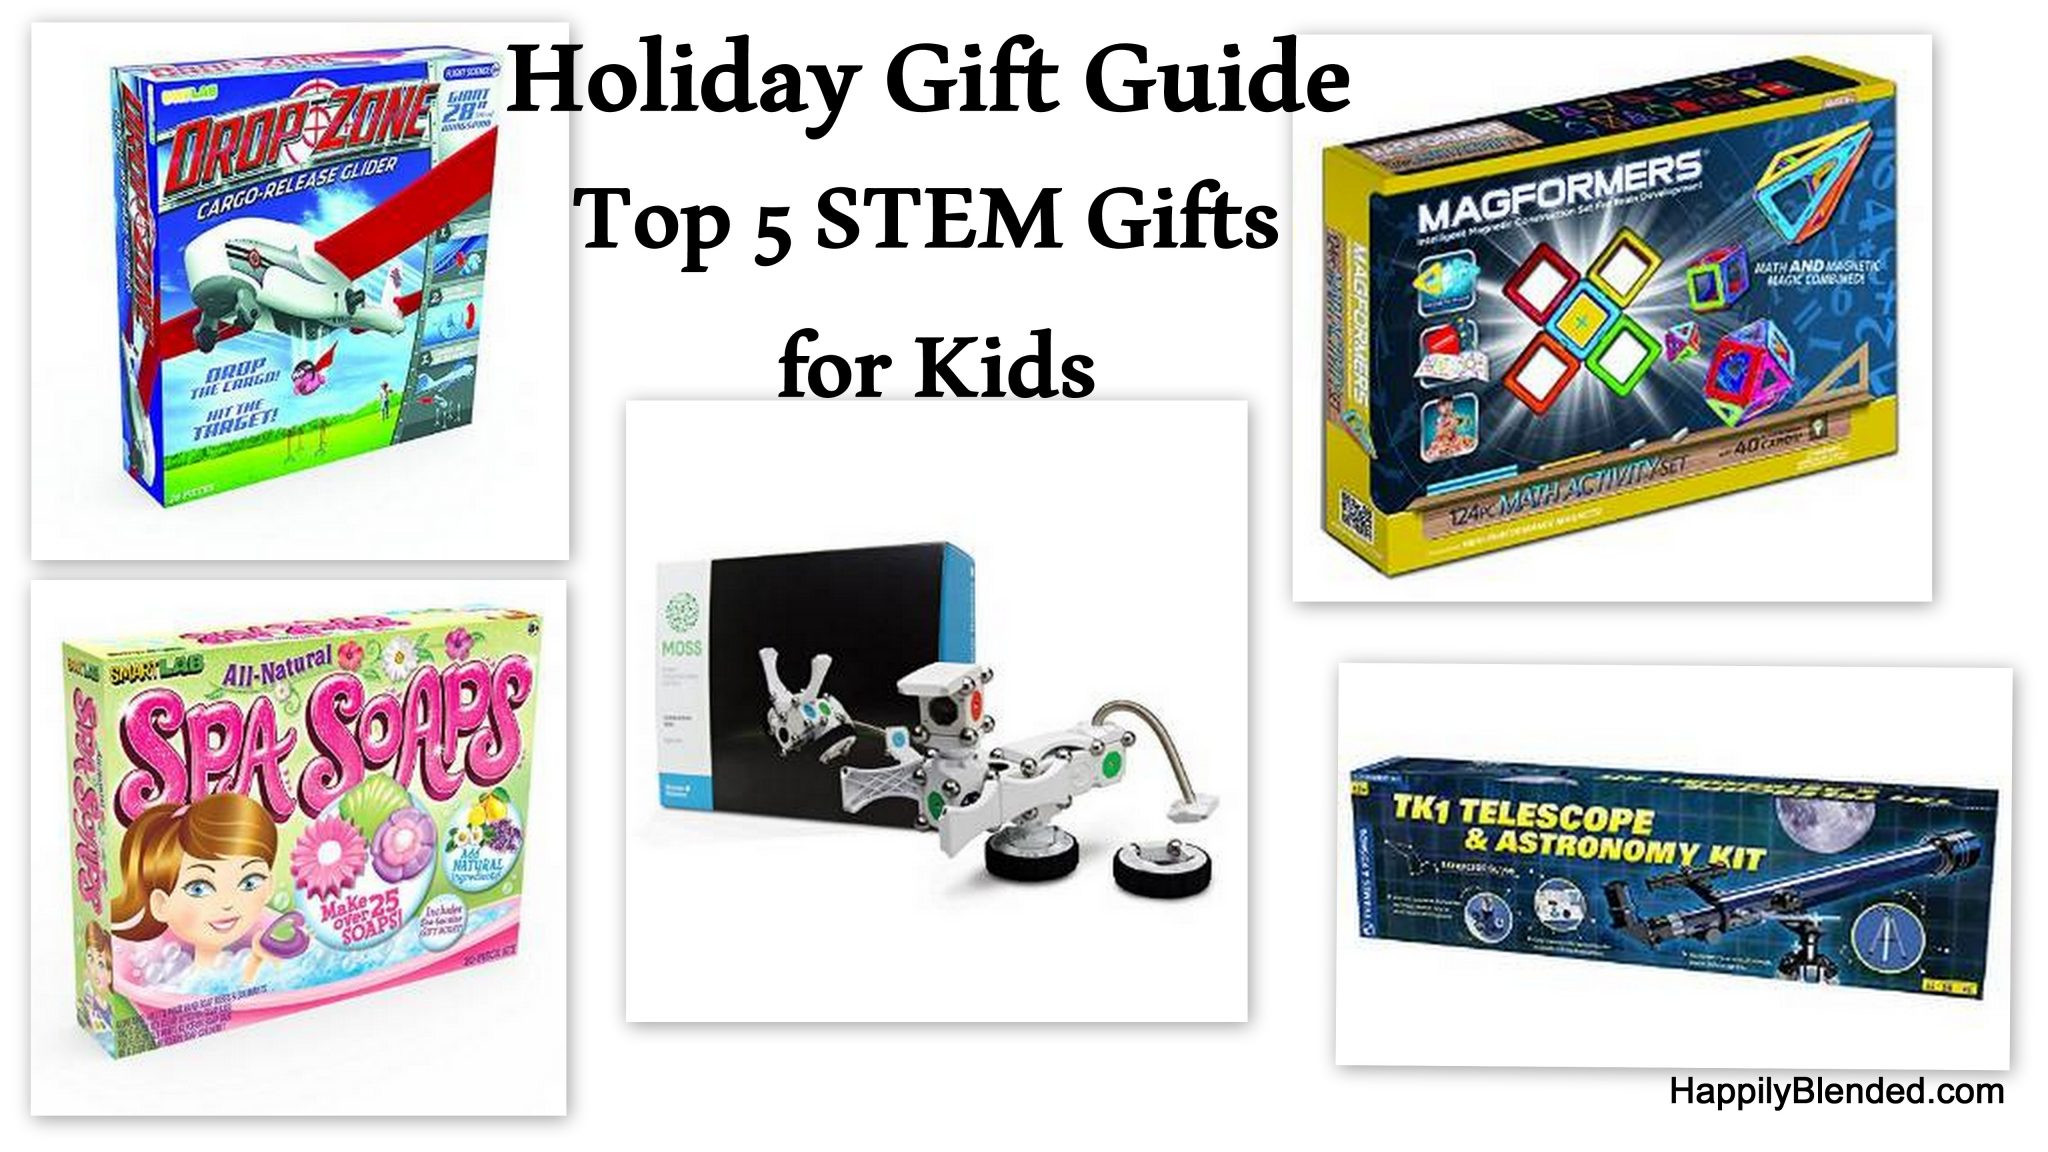 Holiday Gift Guides For Kids
 Holiday Gift Guide Top 5 STEM Toys for Children